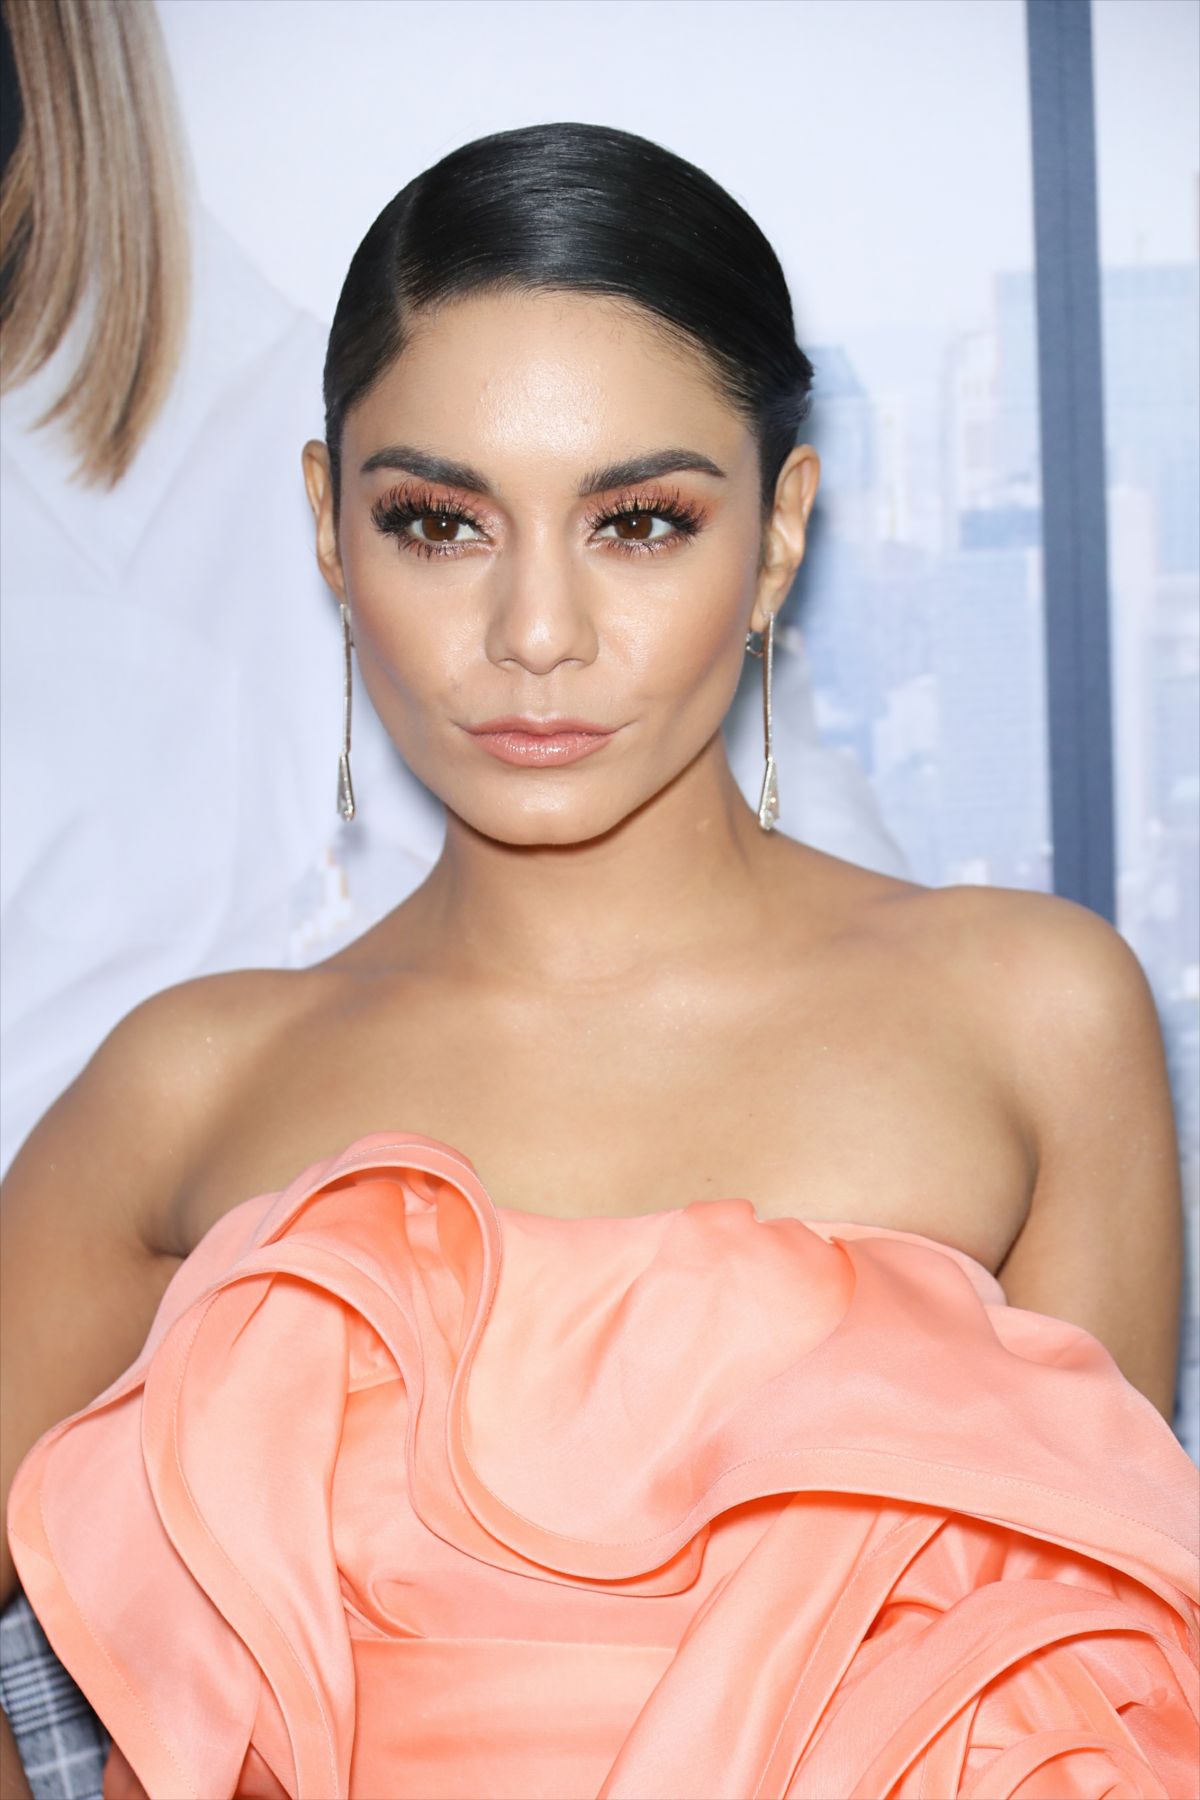 Breaking Down The Life And Career Of Vanessa Hudgens: The Ultimate Guide